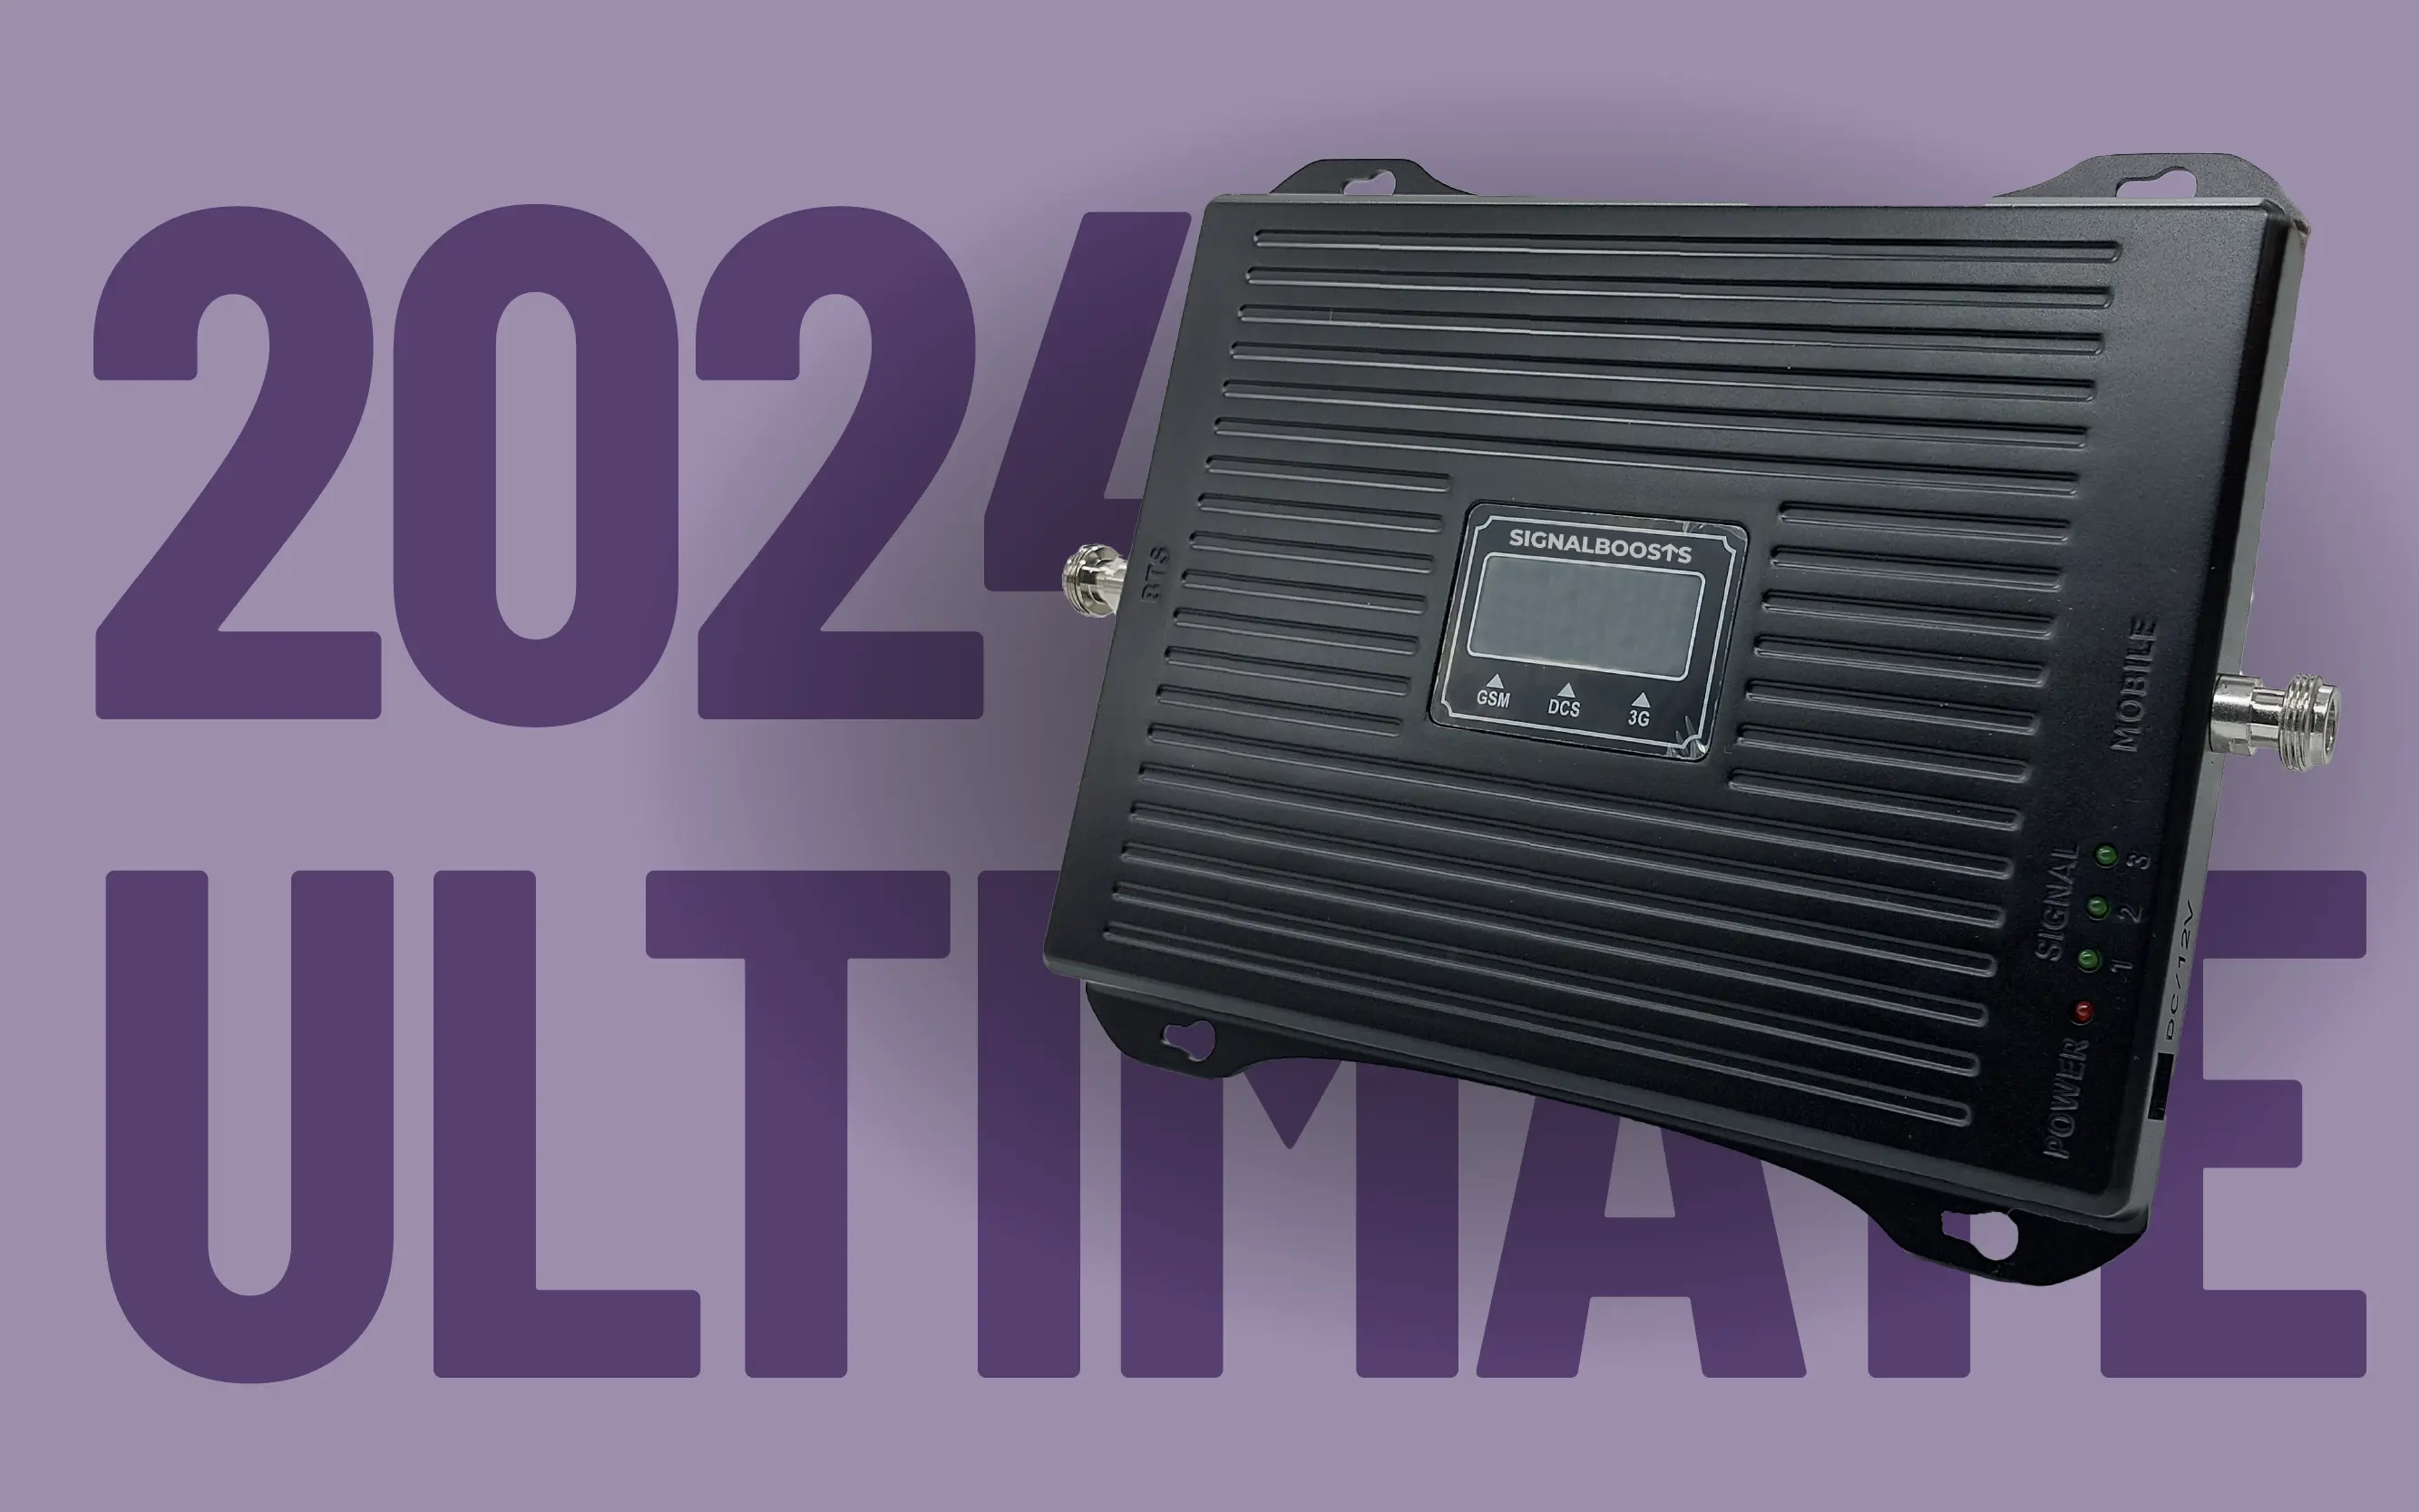 boost 2024 ultimate mobile signal booster